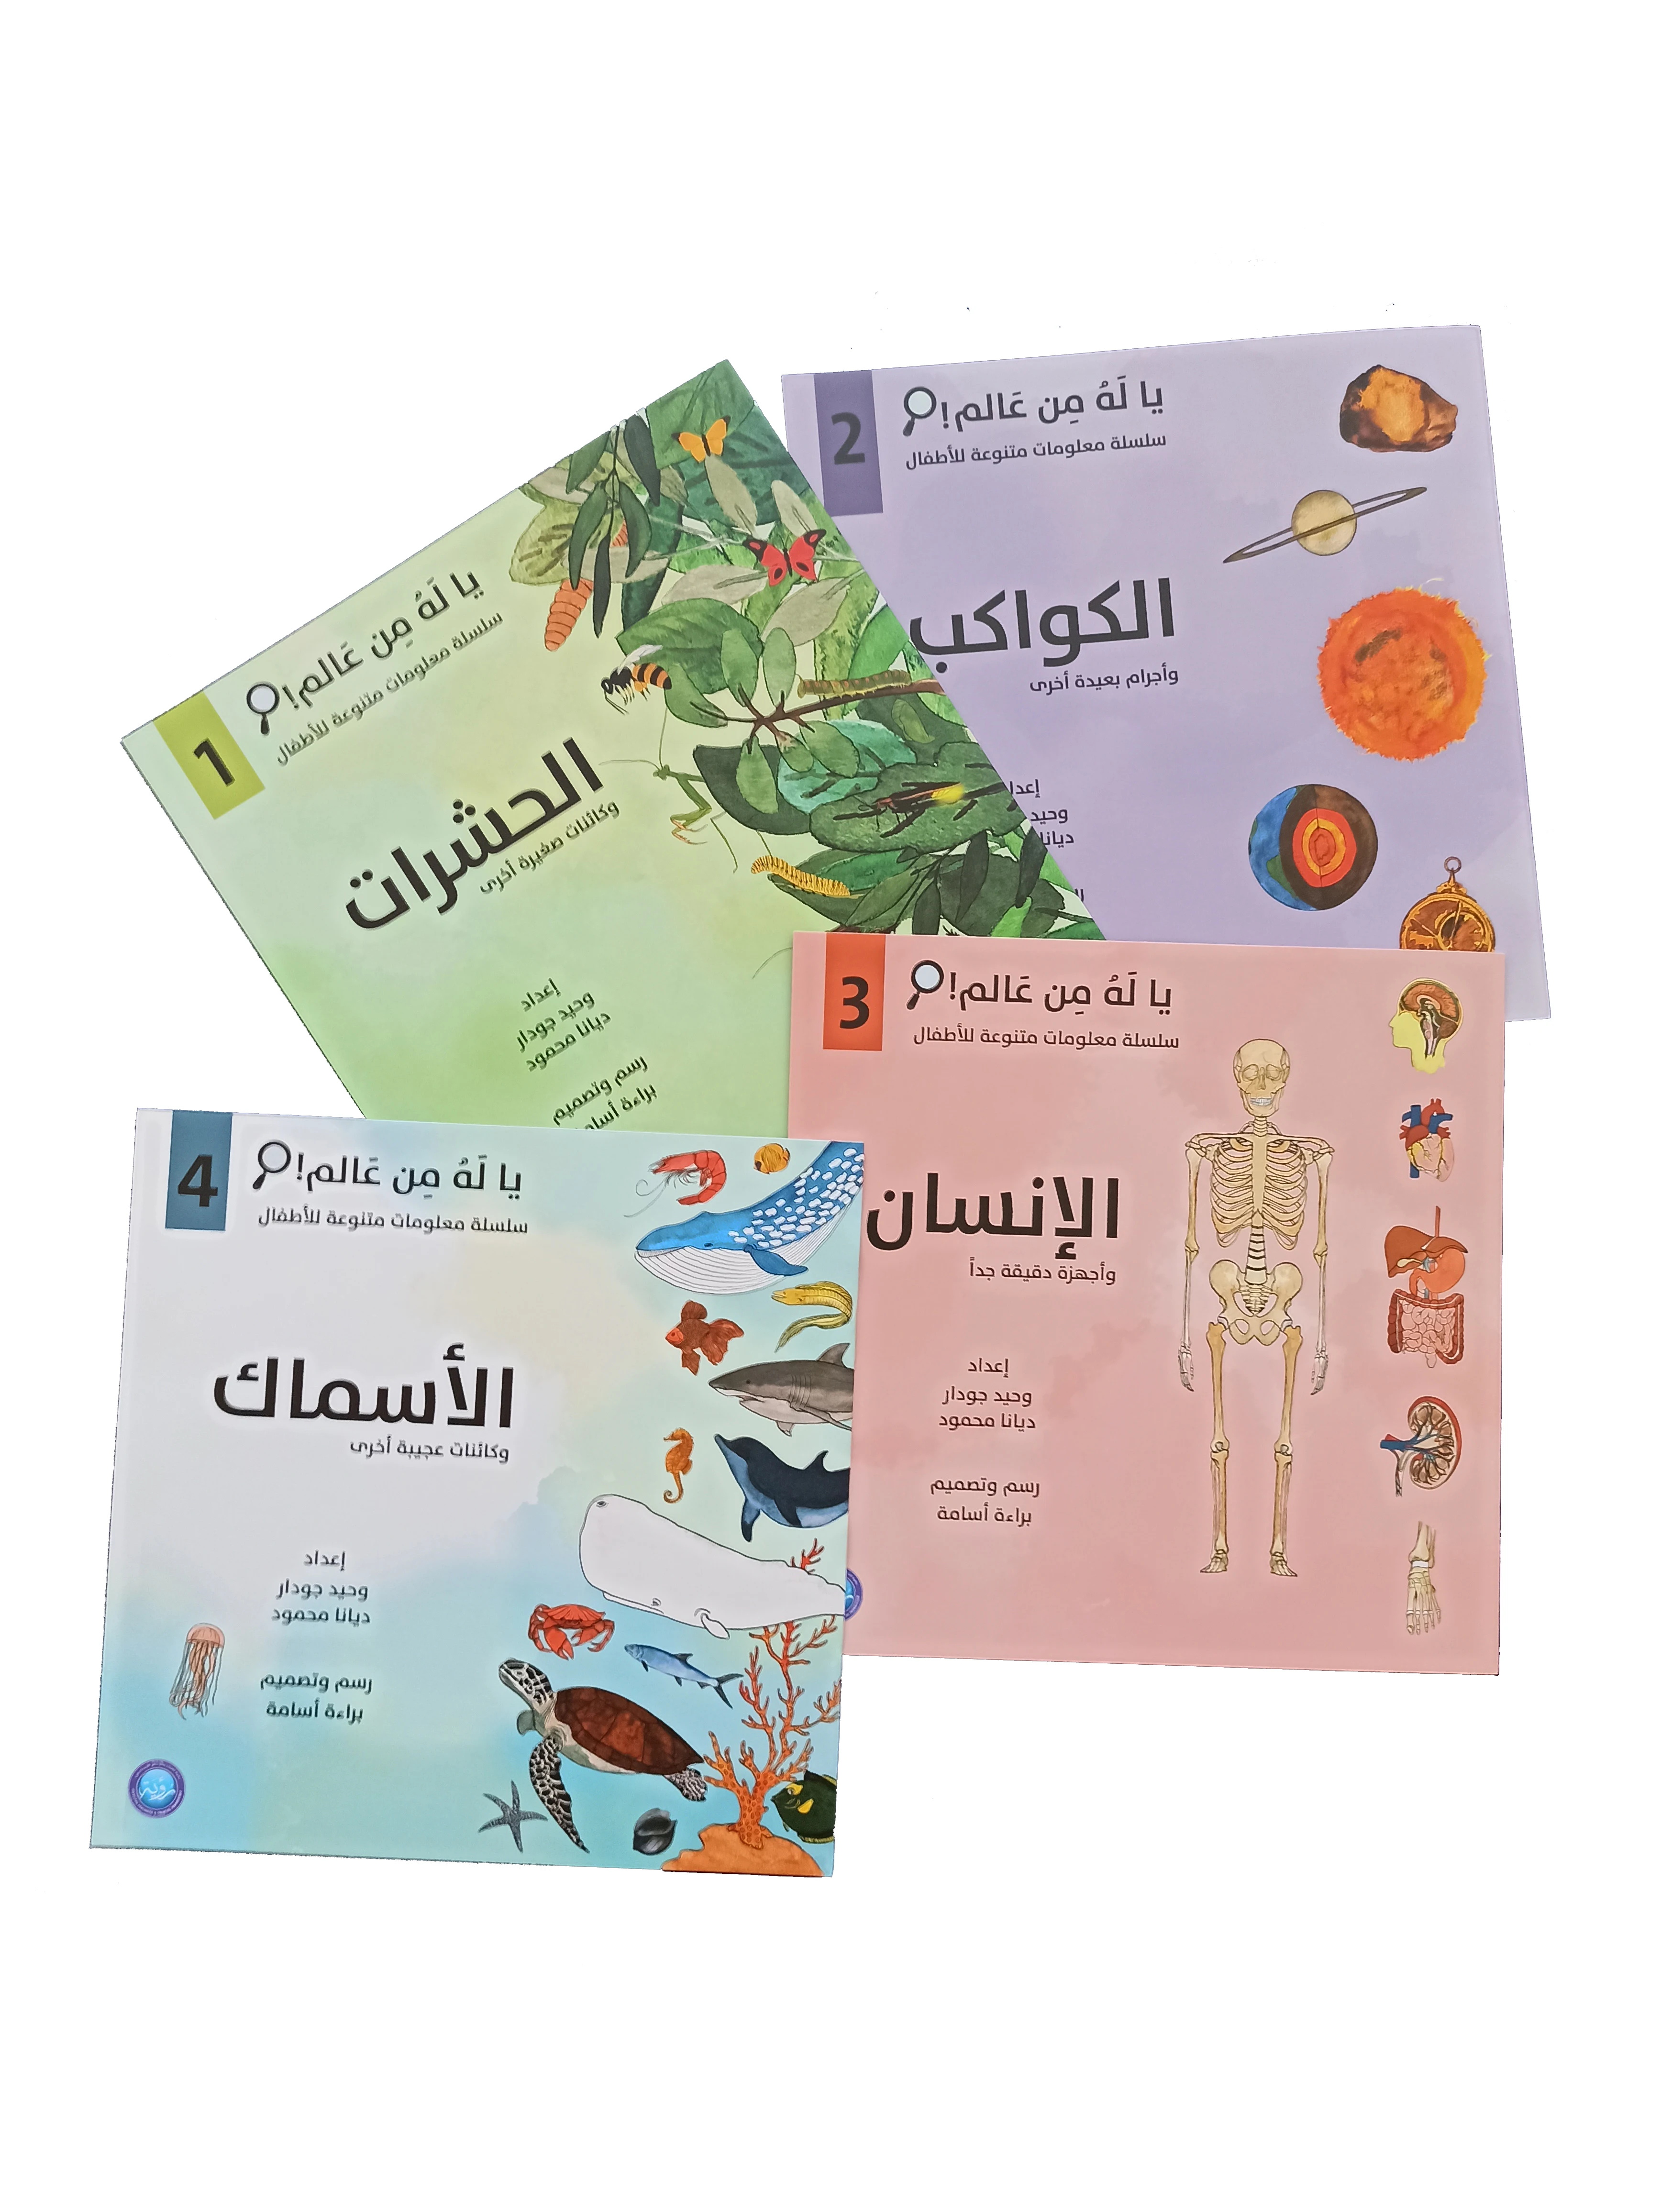 arabic-language-education-pictures-books-human-anatomy-İnsects-sea-creatures-astronomy-and-the-earth-early-learning-children